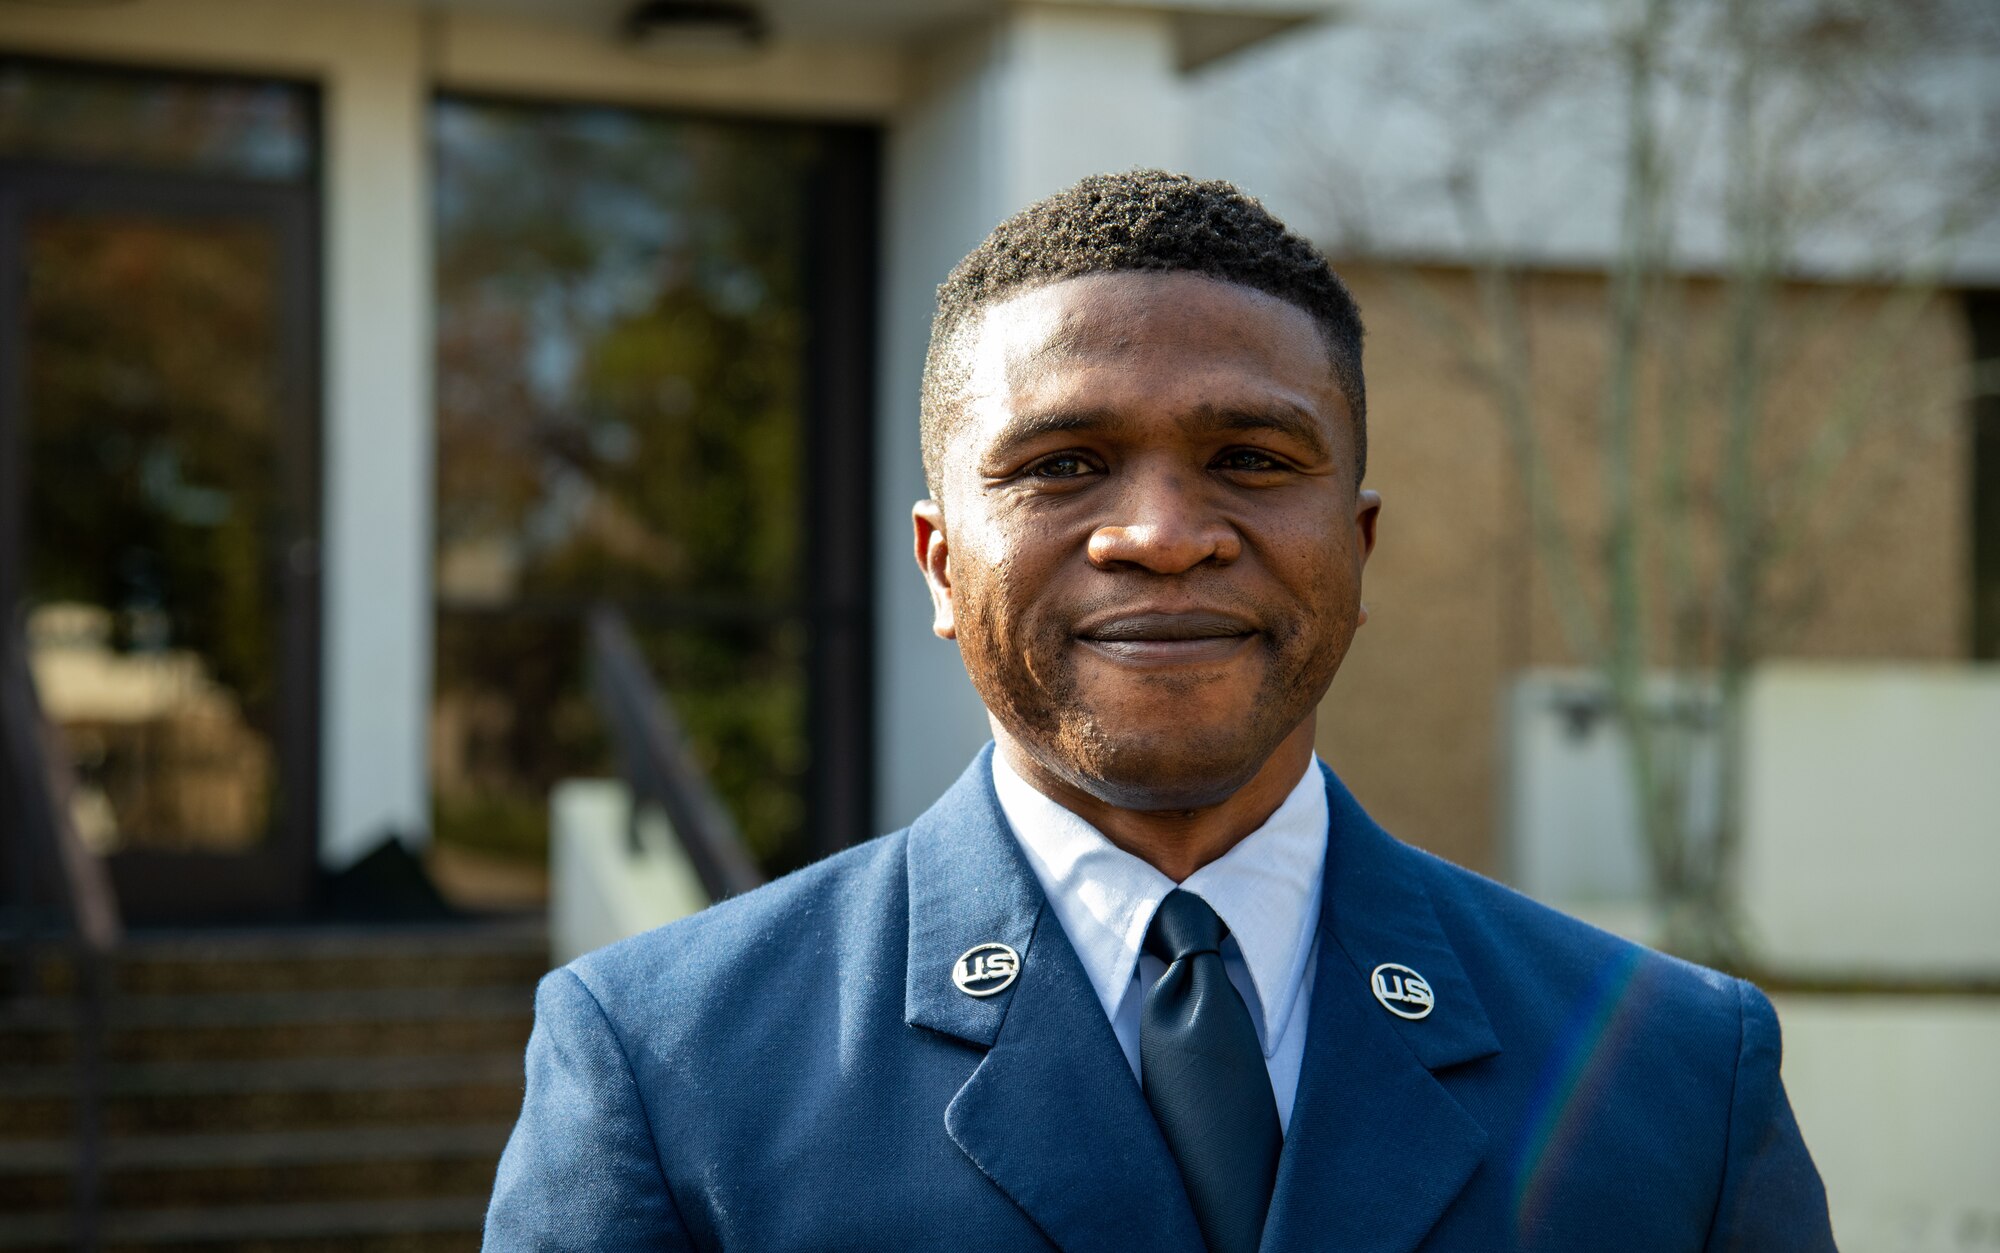 Bust shot of Airman in service blues outside of a building